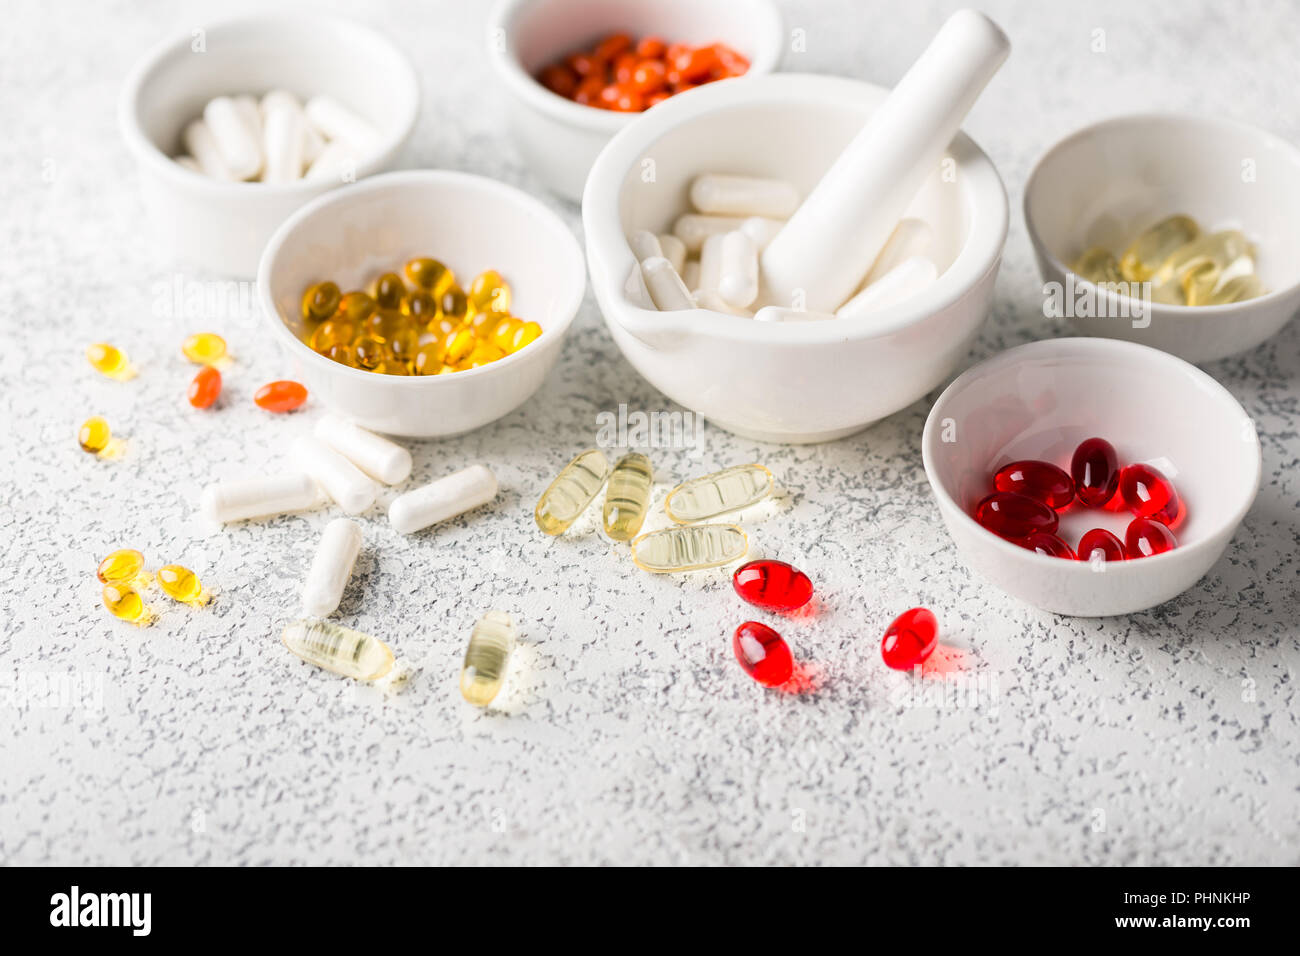 Medicine pills, tablets and capsules Stock Photo